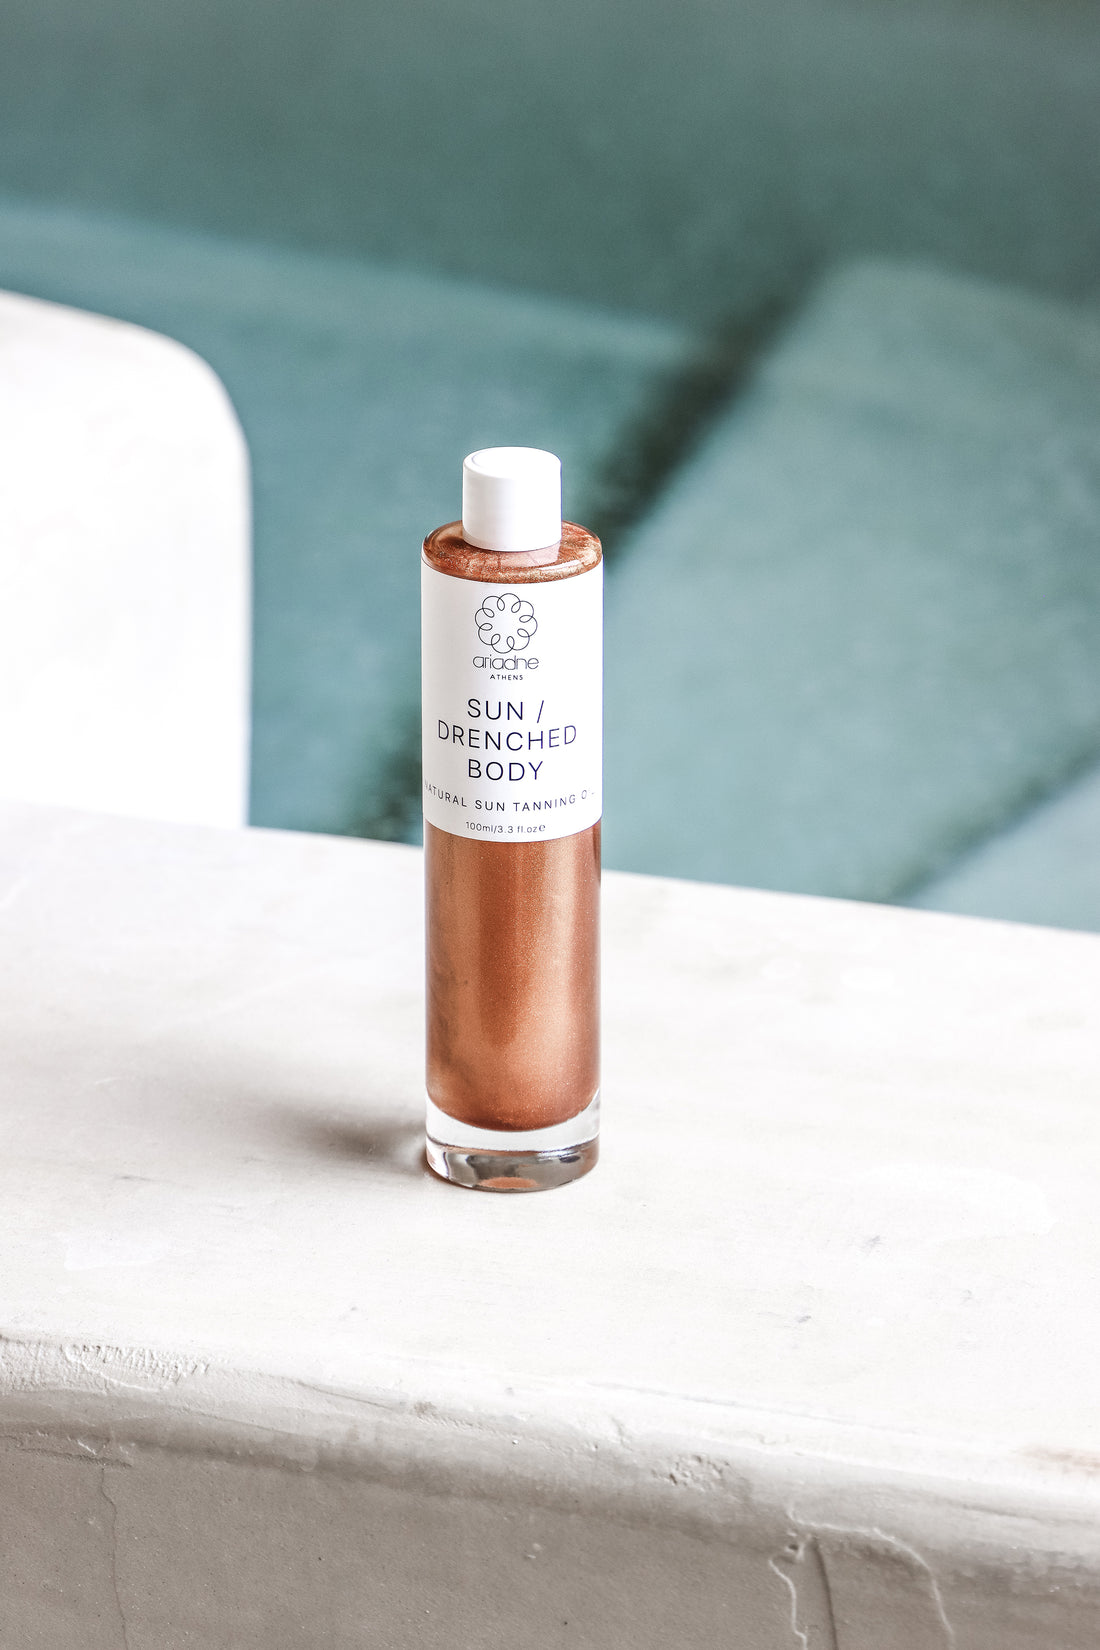 Sun-Drenched Body Tanning Oil in details.